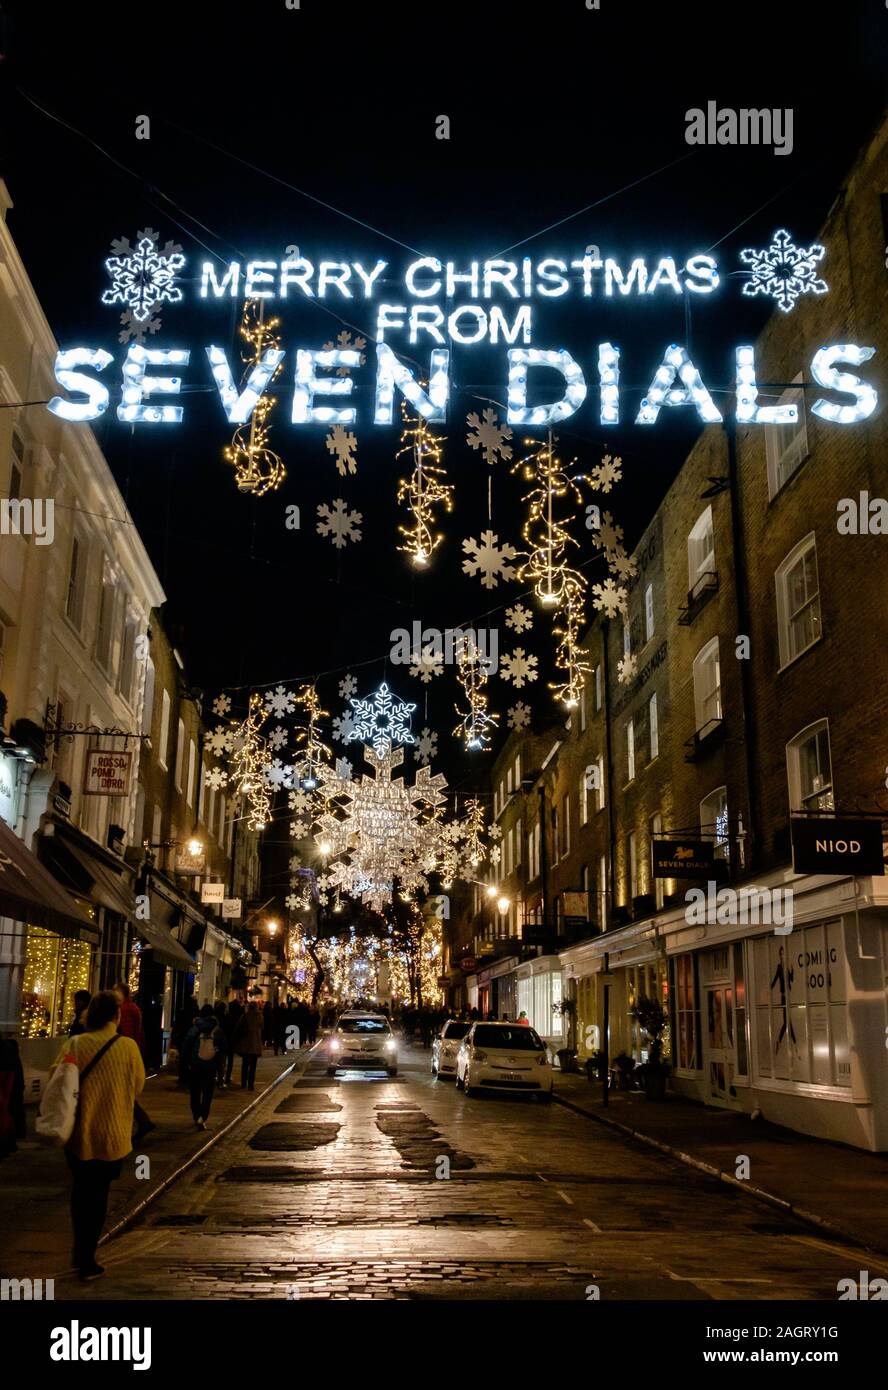 Christmas Lights above the street saying Merry Christmas from Seven Dials with snowflake decorations in background, evening, Central London. Stock Photo